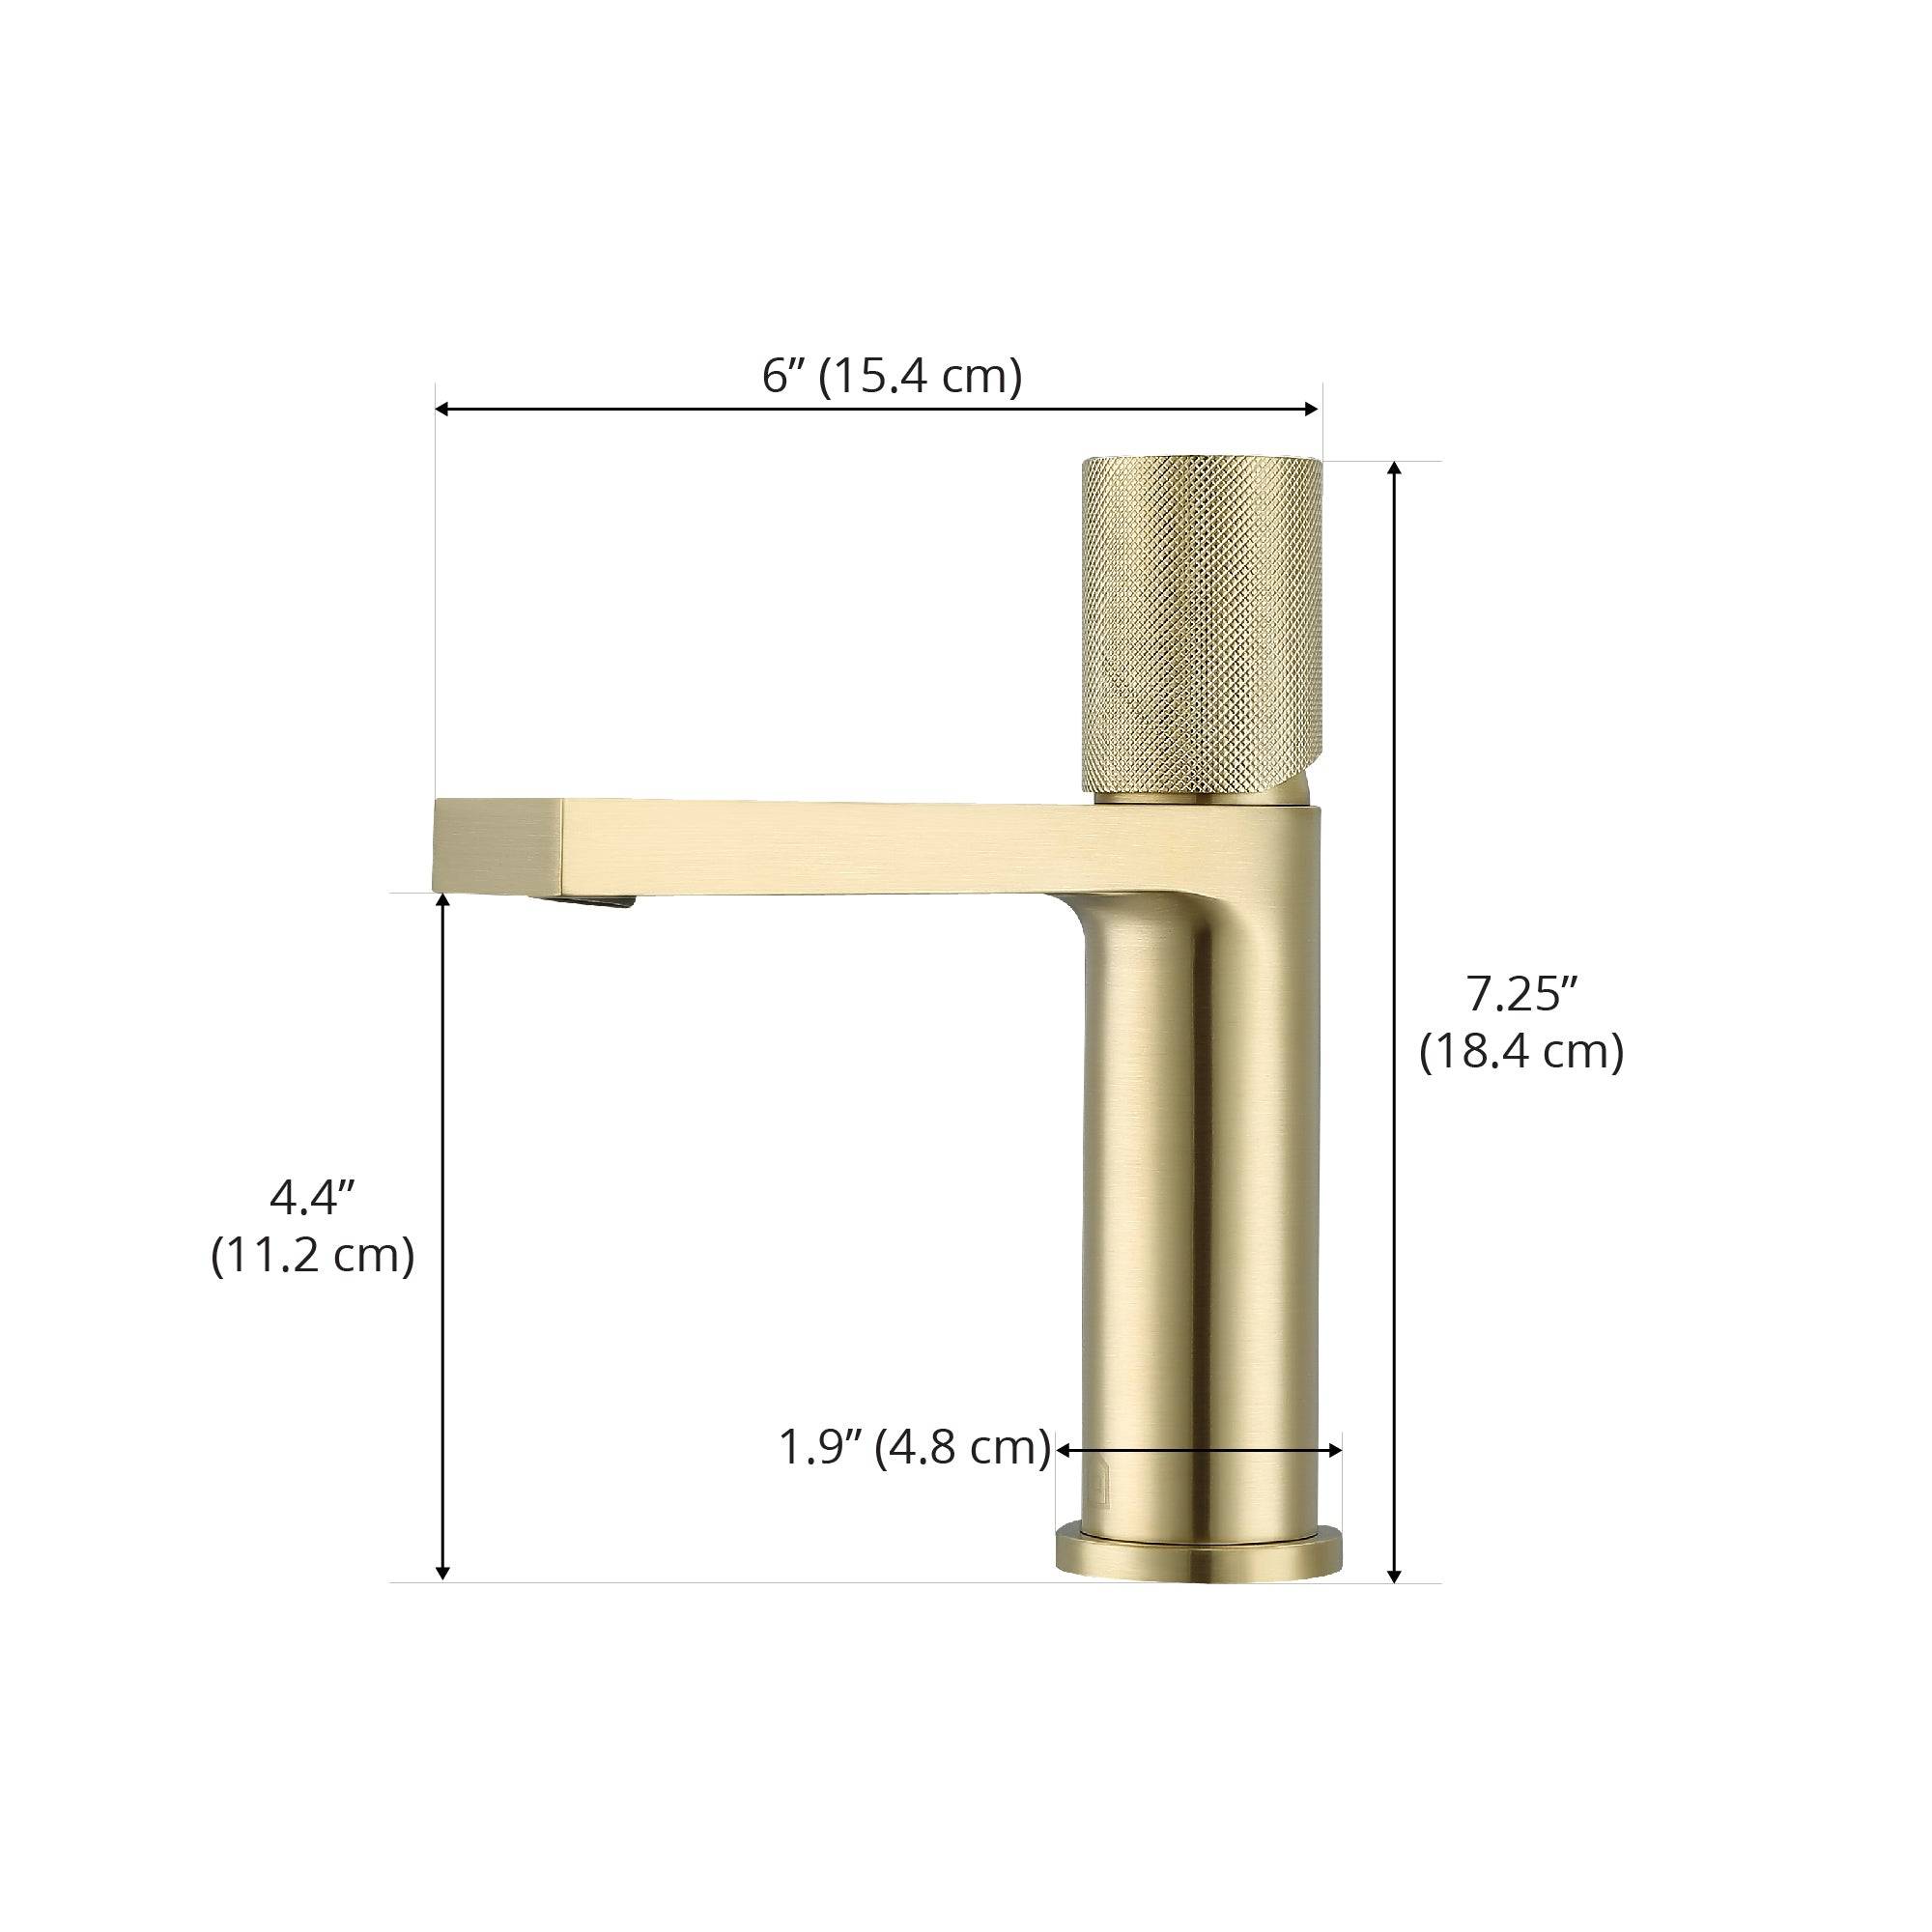 Ancona Isla Single Handle Bathroom Faucet in Brushed Champagne Gold